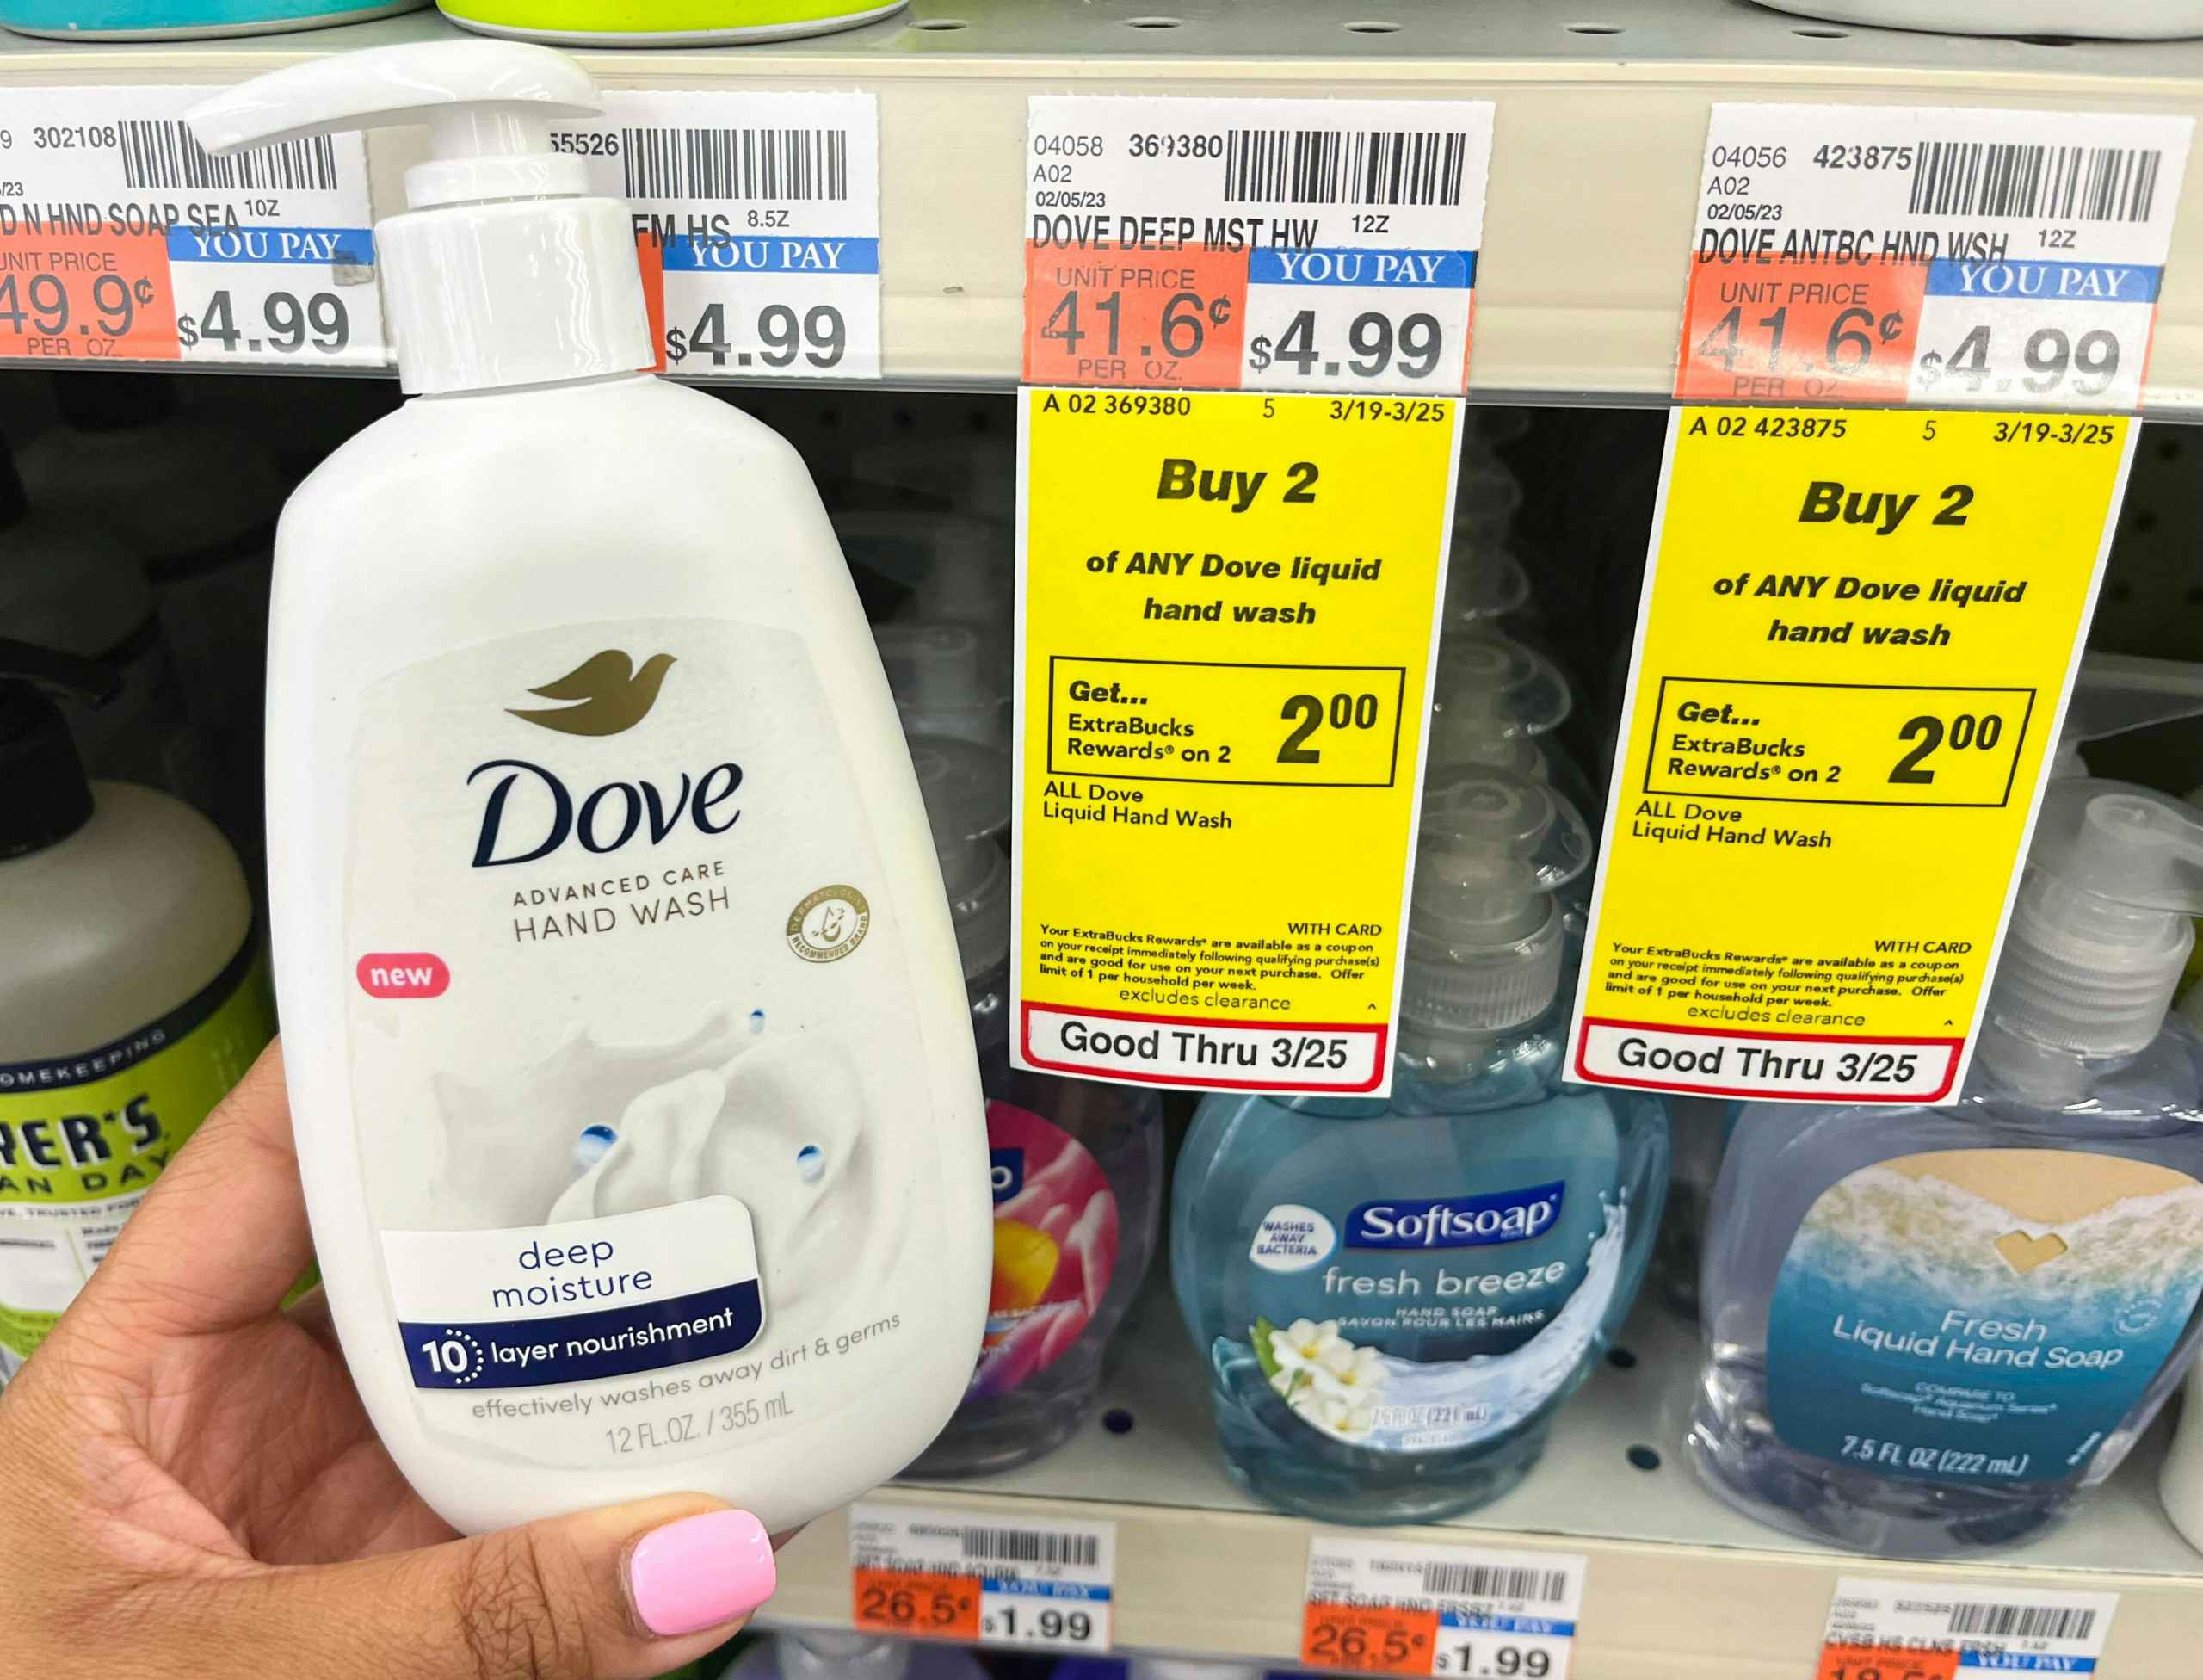 hand holding bottle of Dove advanced care hand wash next to sales tag